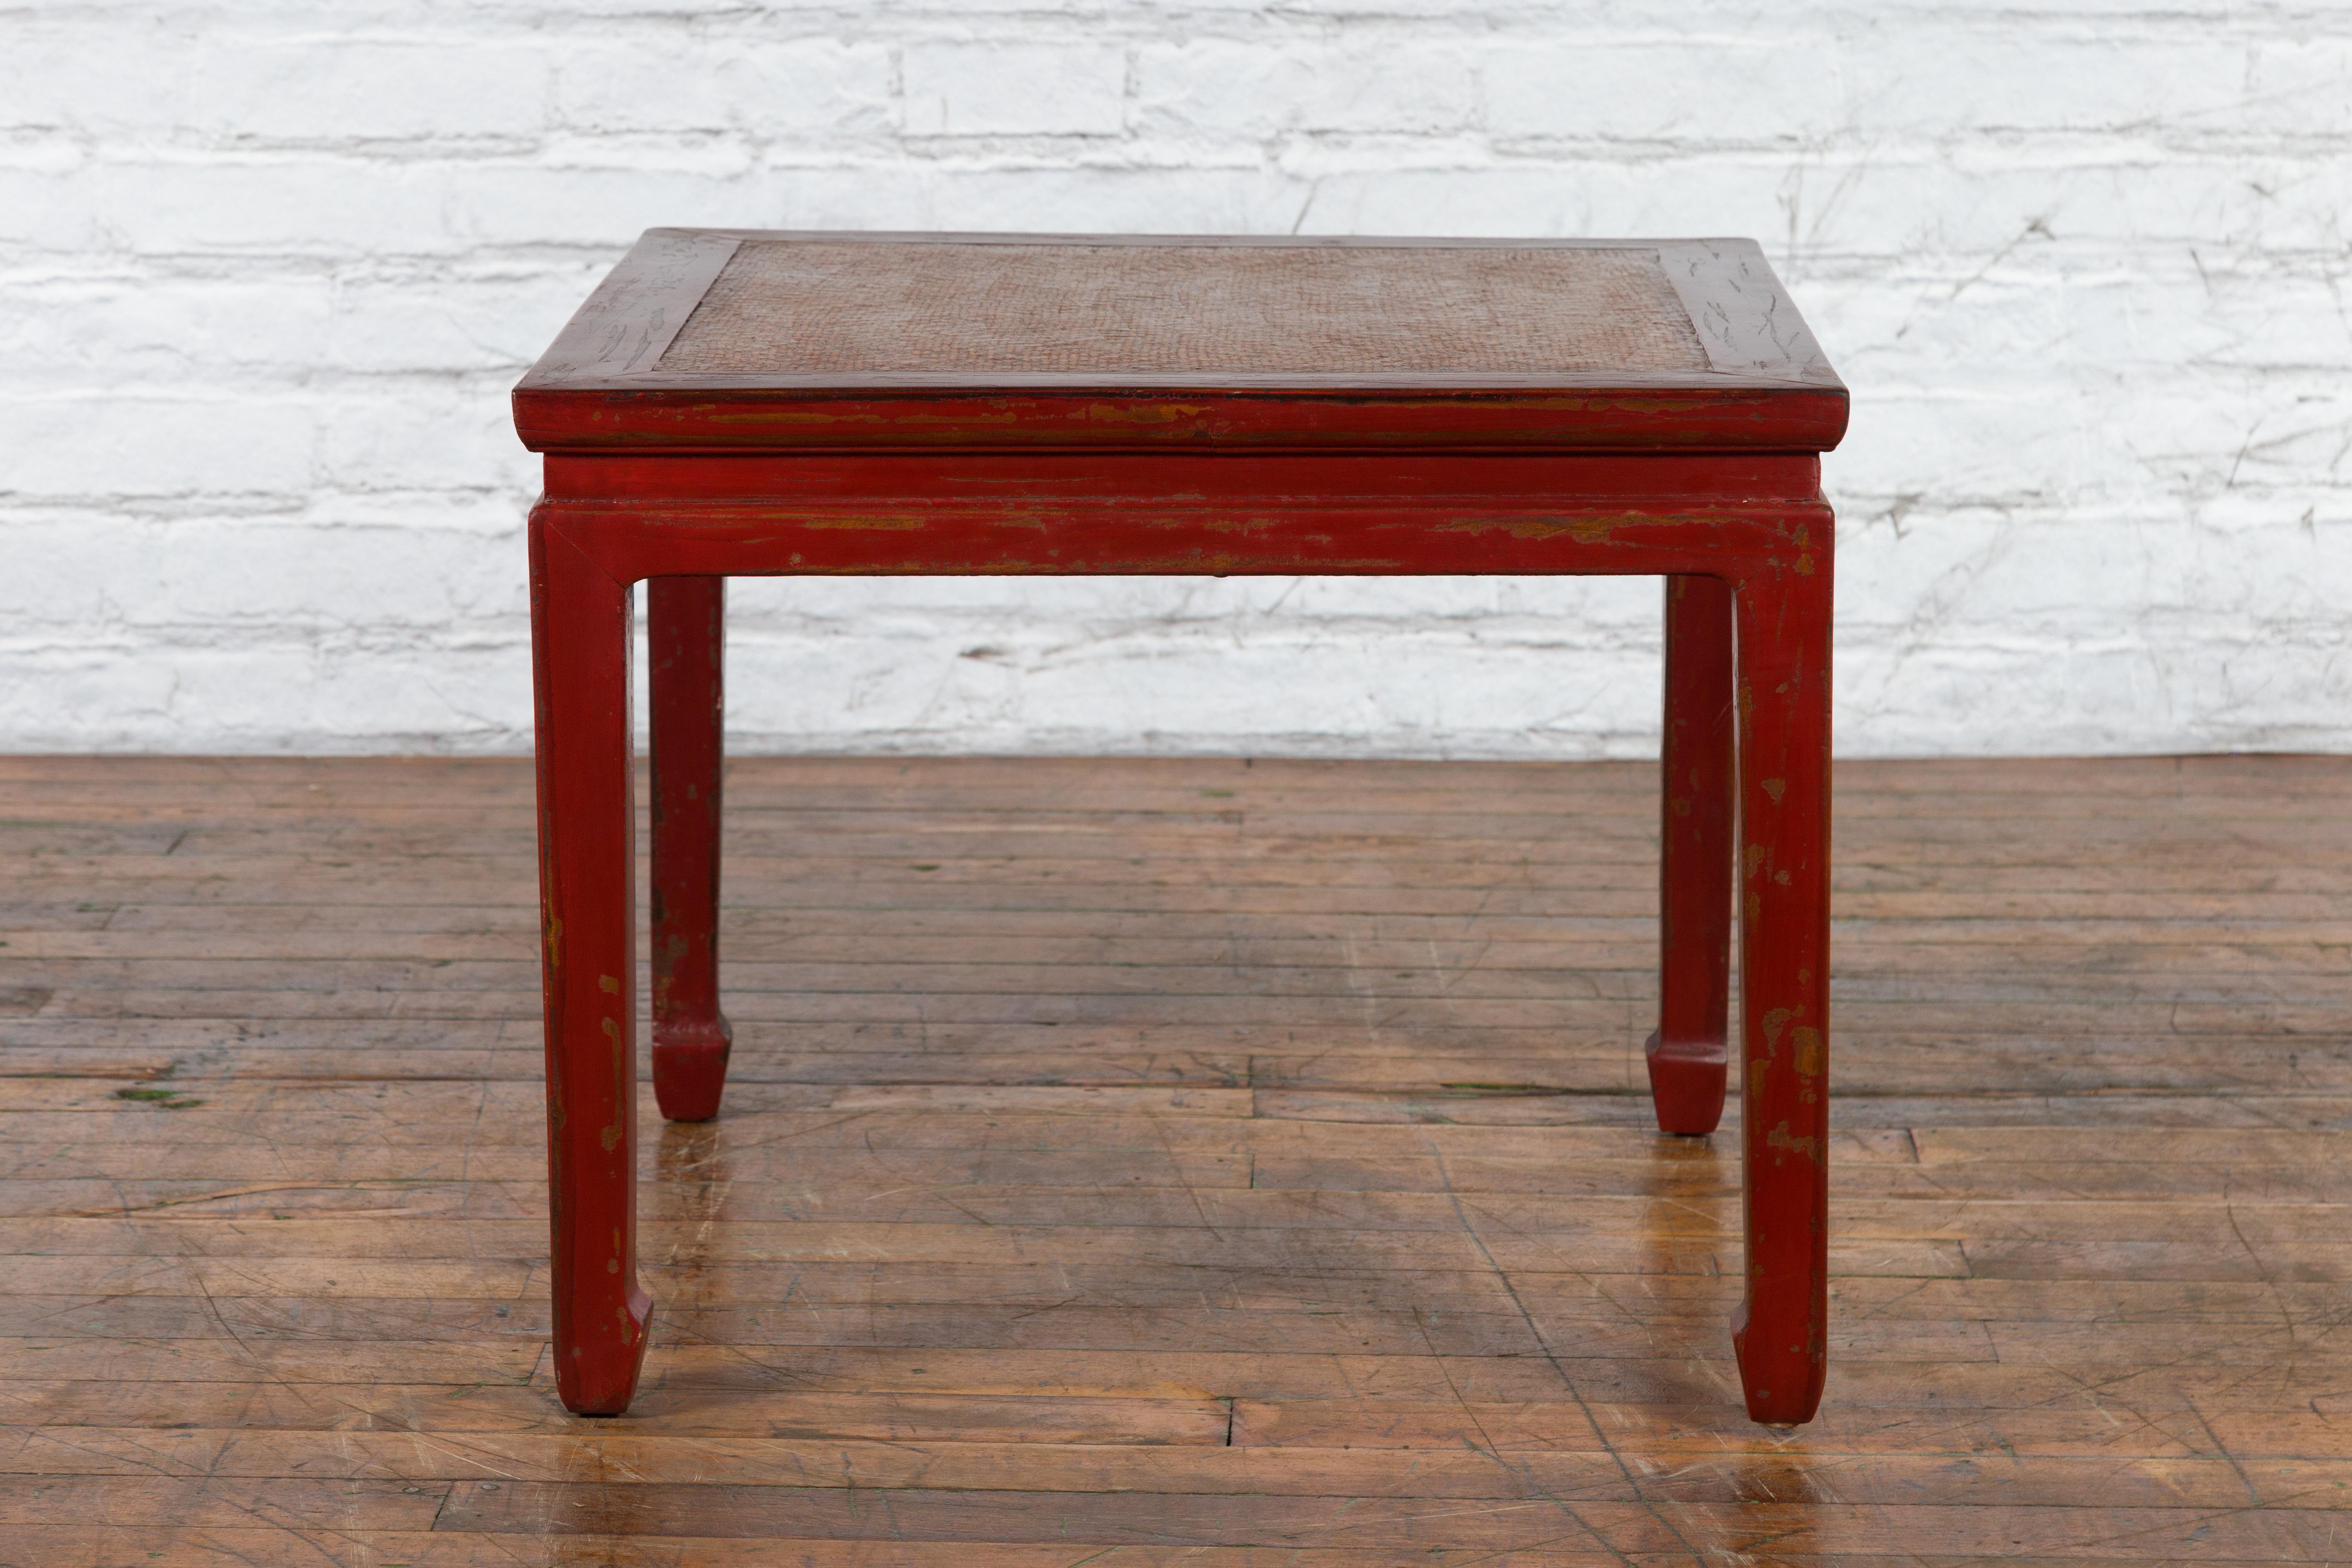 A Chinese Qing Dynasty period side table from the 19th century, with red lacquer, woven rattan top, horse hoof legs and waisted apron. Created in China during the Qing Dynasty period in the 19th century, this side table features a square top